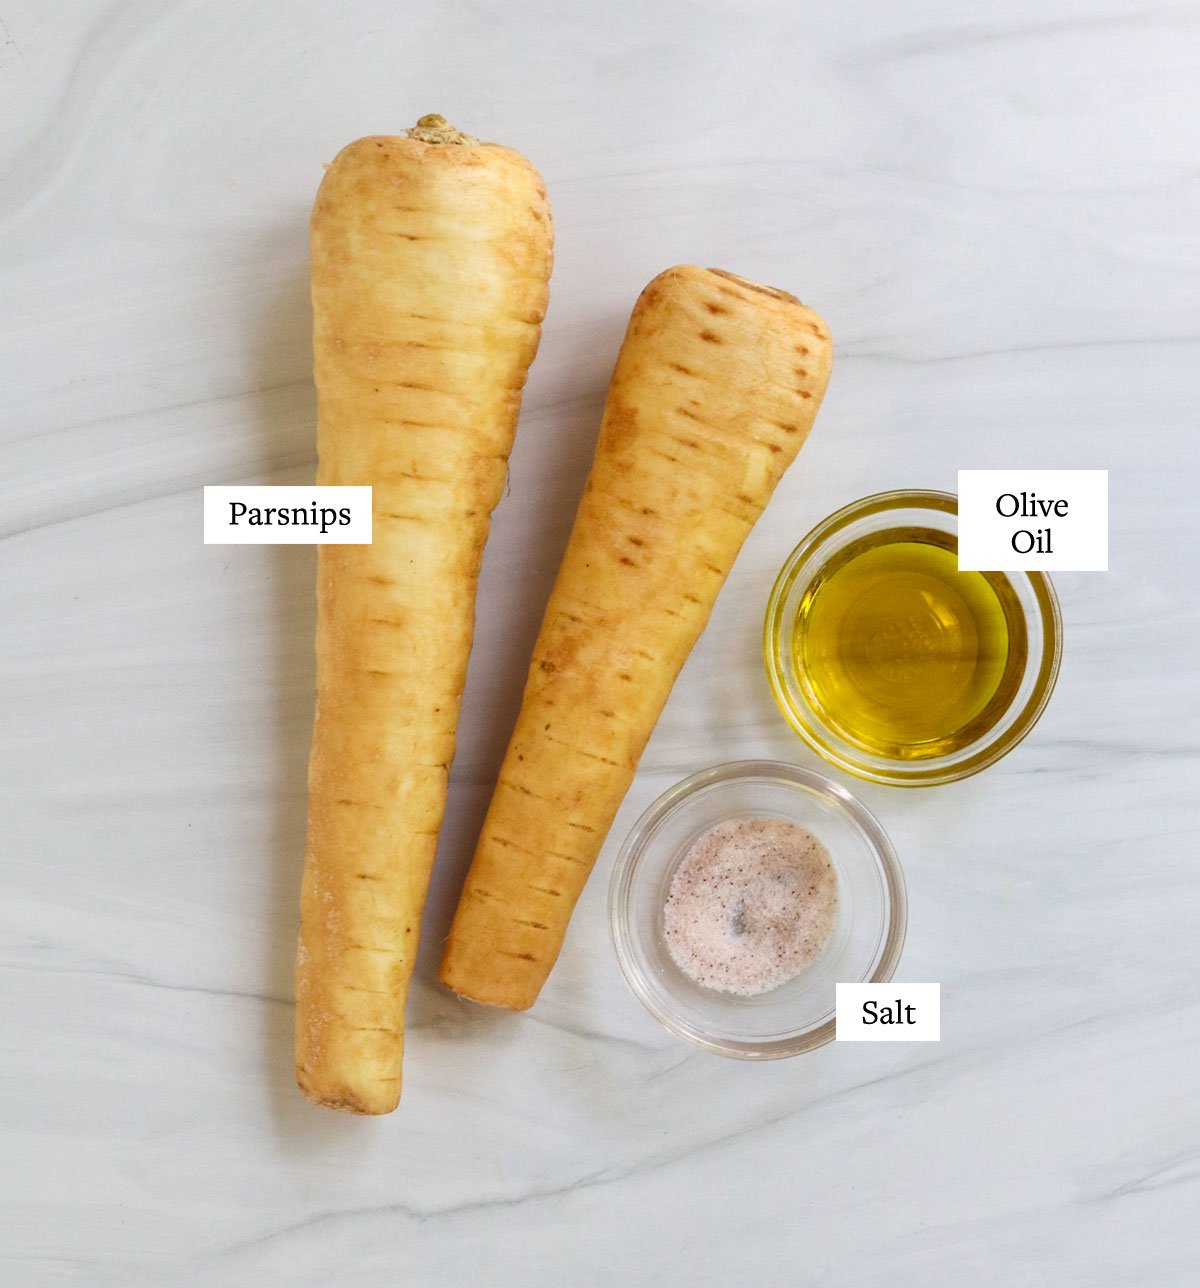 parsnip chip ingredients labeled on white surface.